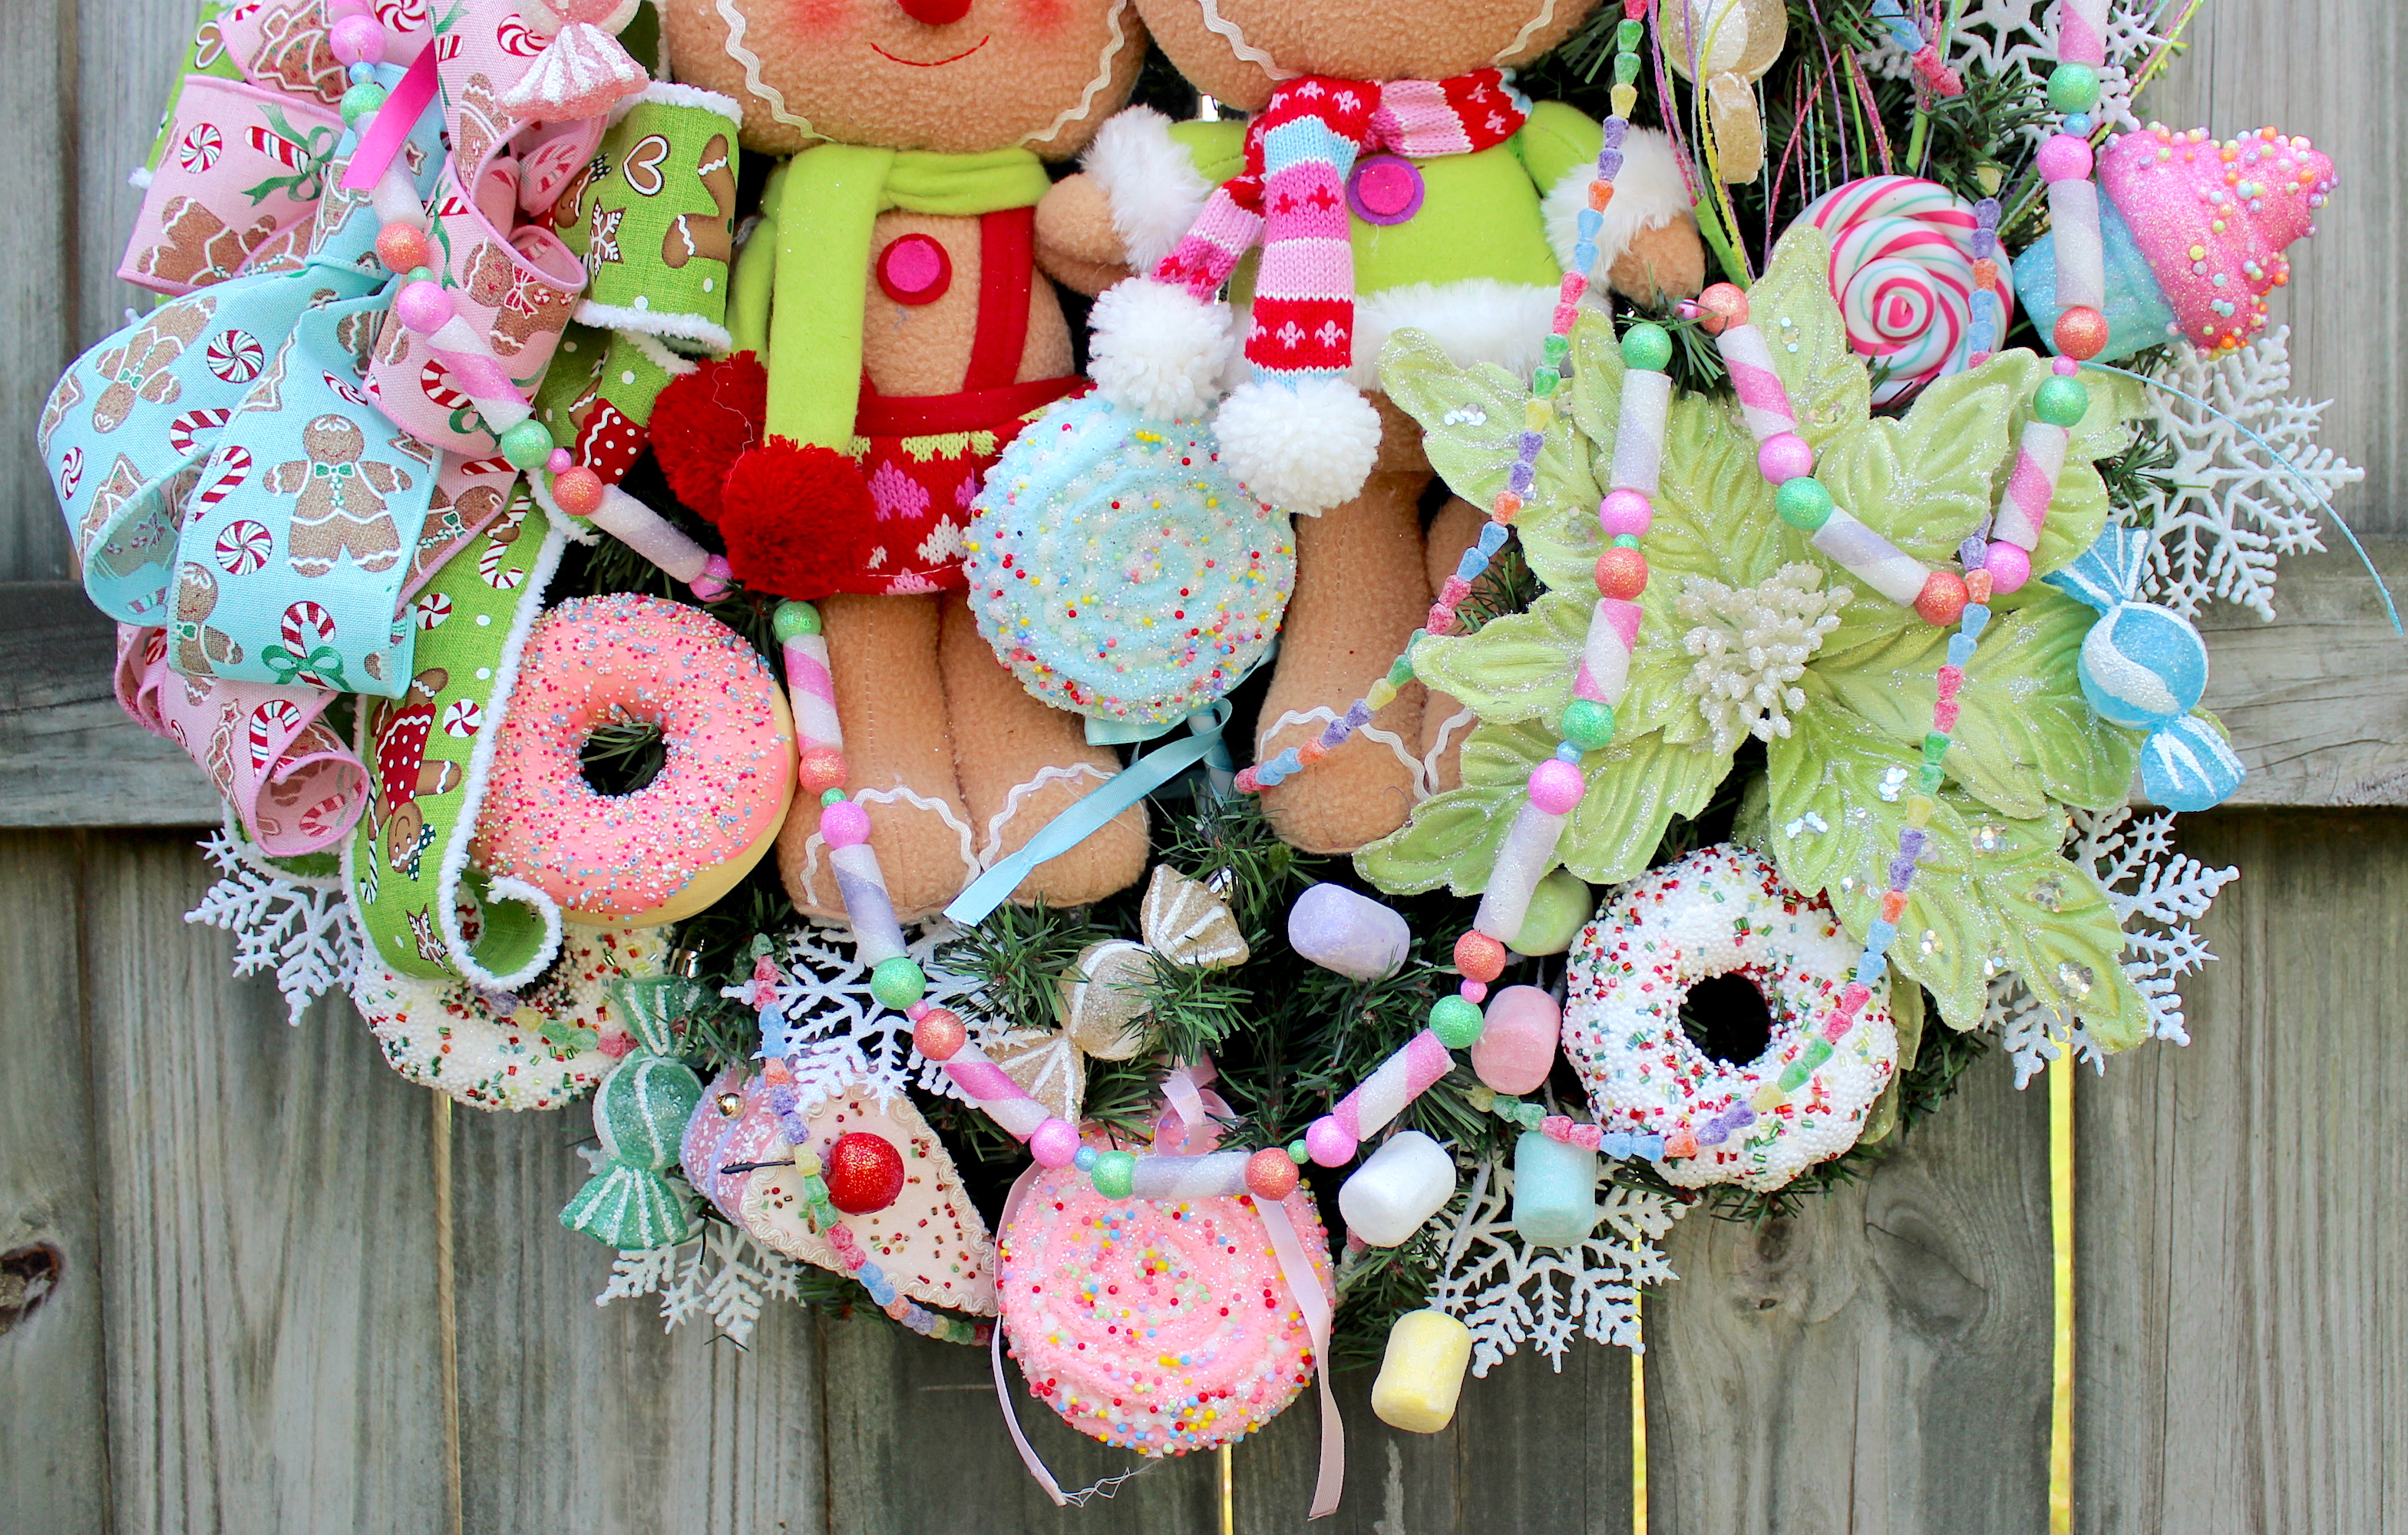 Irish Girl's Wreaths  Top Quality Handmade Artisan Floral Wreaths for all  Seasons » Deluxe Pastel Sweet Treat Candy Donuts Christmas Wreath, Pink  Christmas, Lollipops, Light Blue Christmas, Christmas Wreath